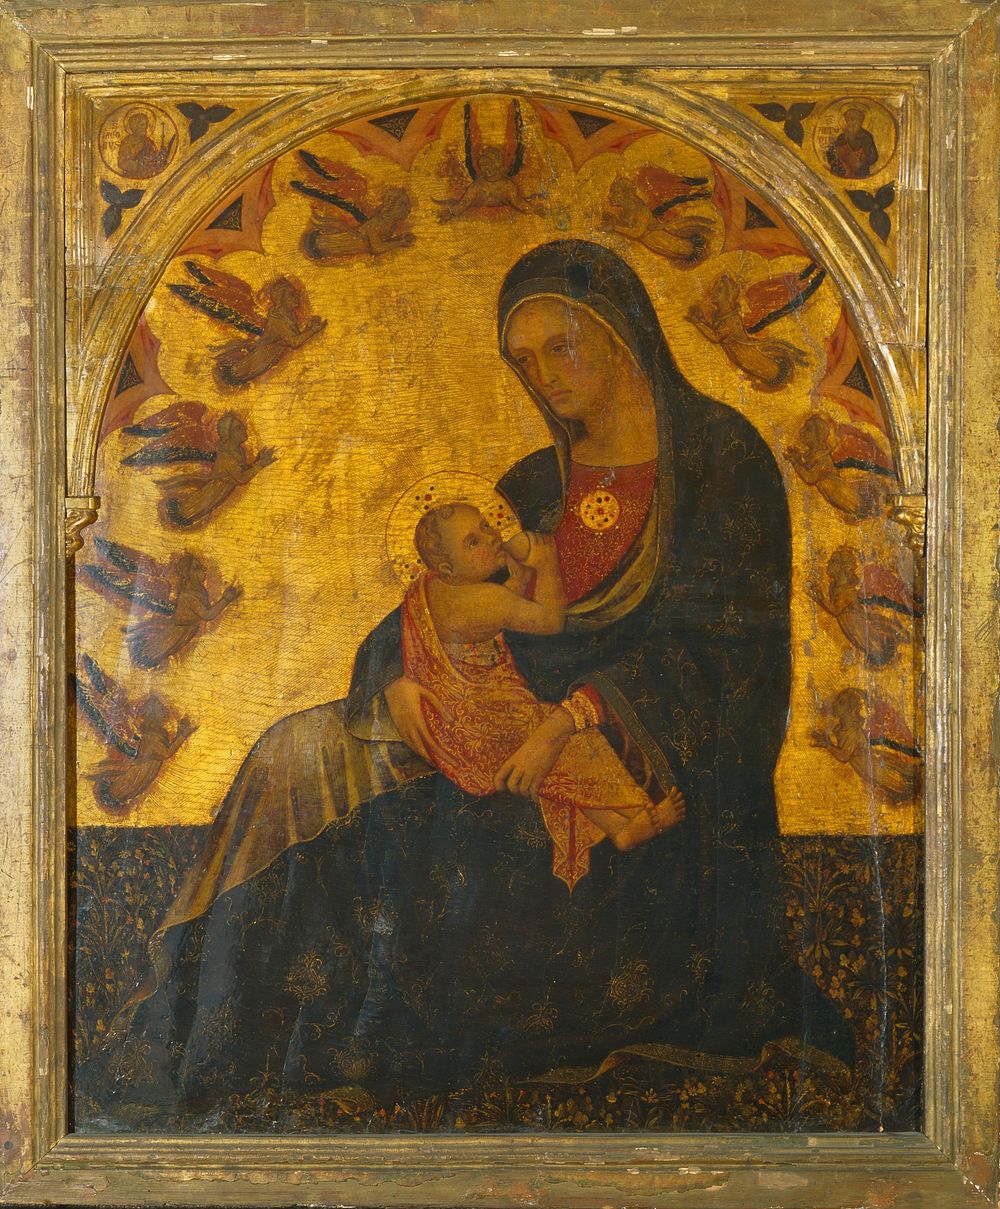 Madonna and Child (15th century) painting in high resolution by anonymous.  